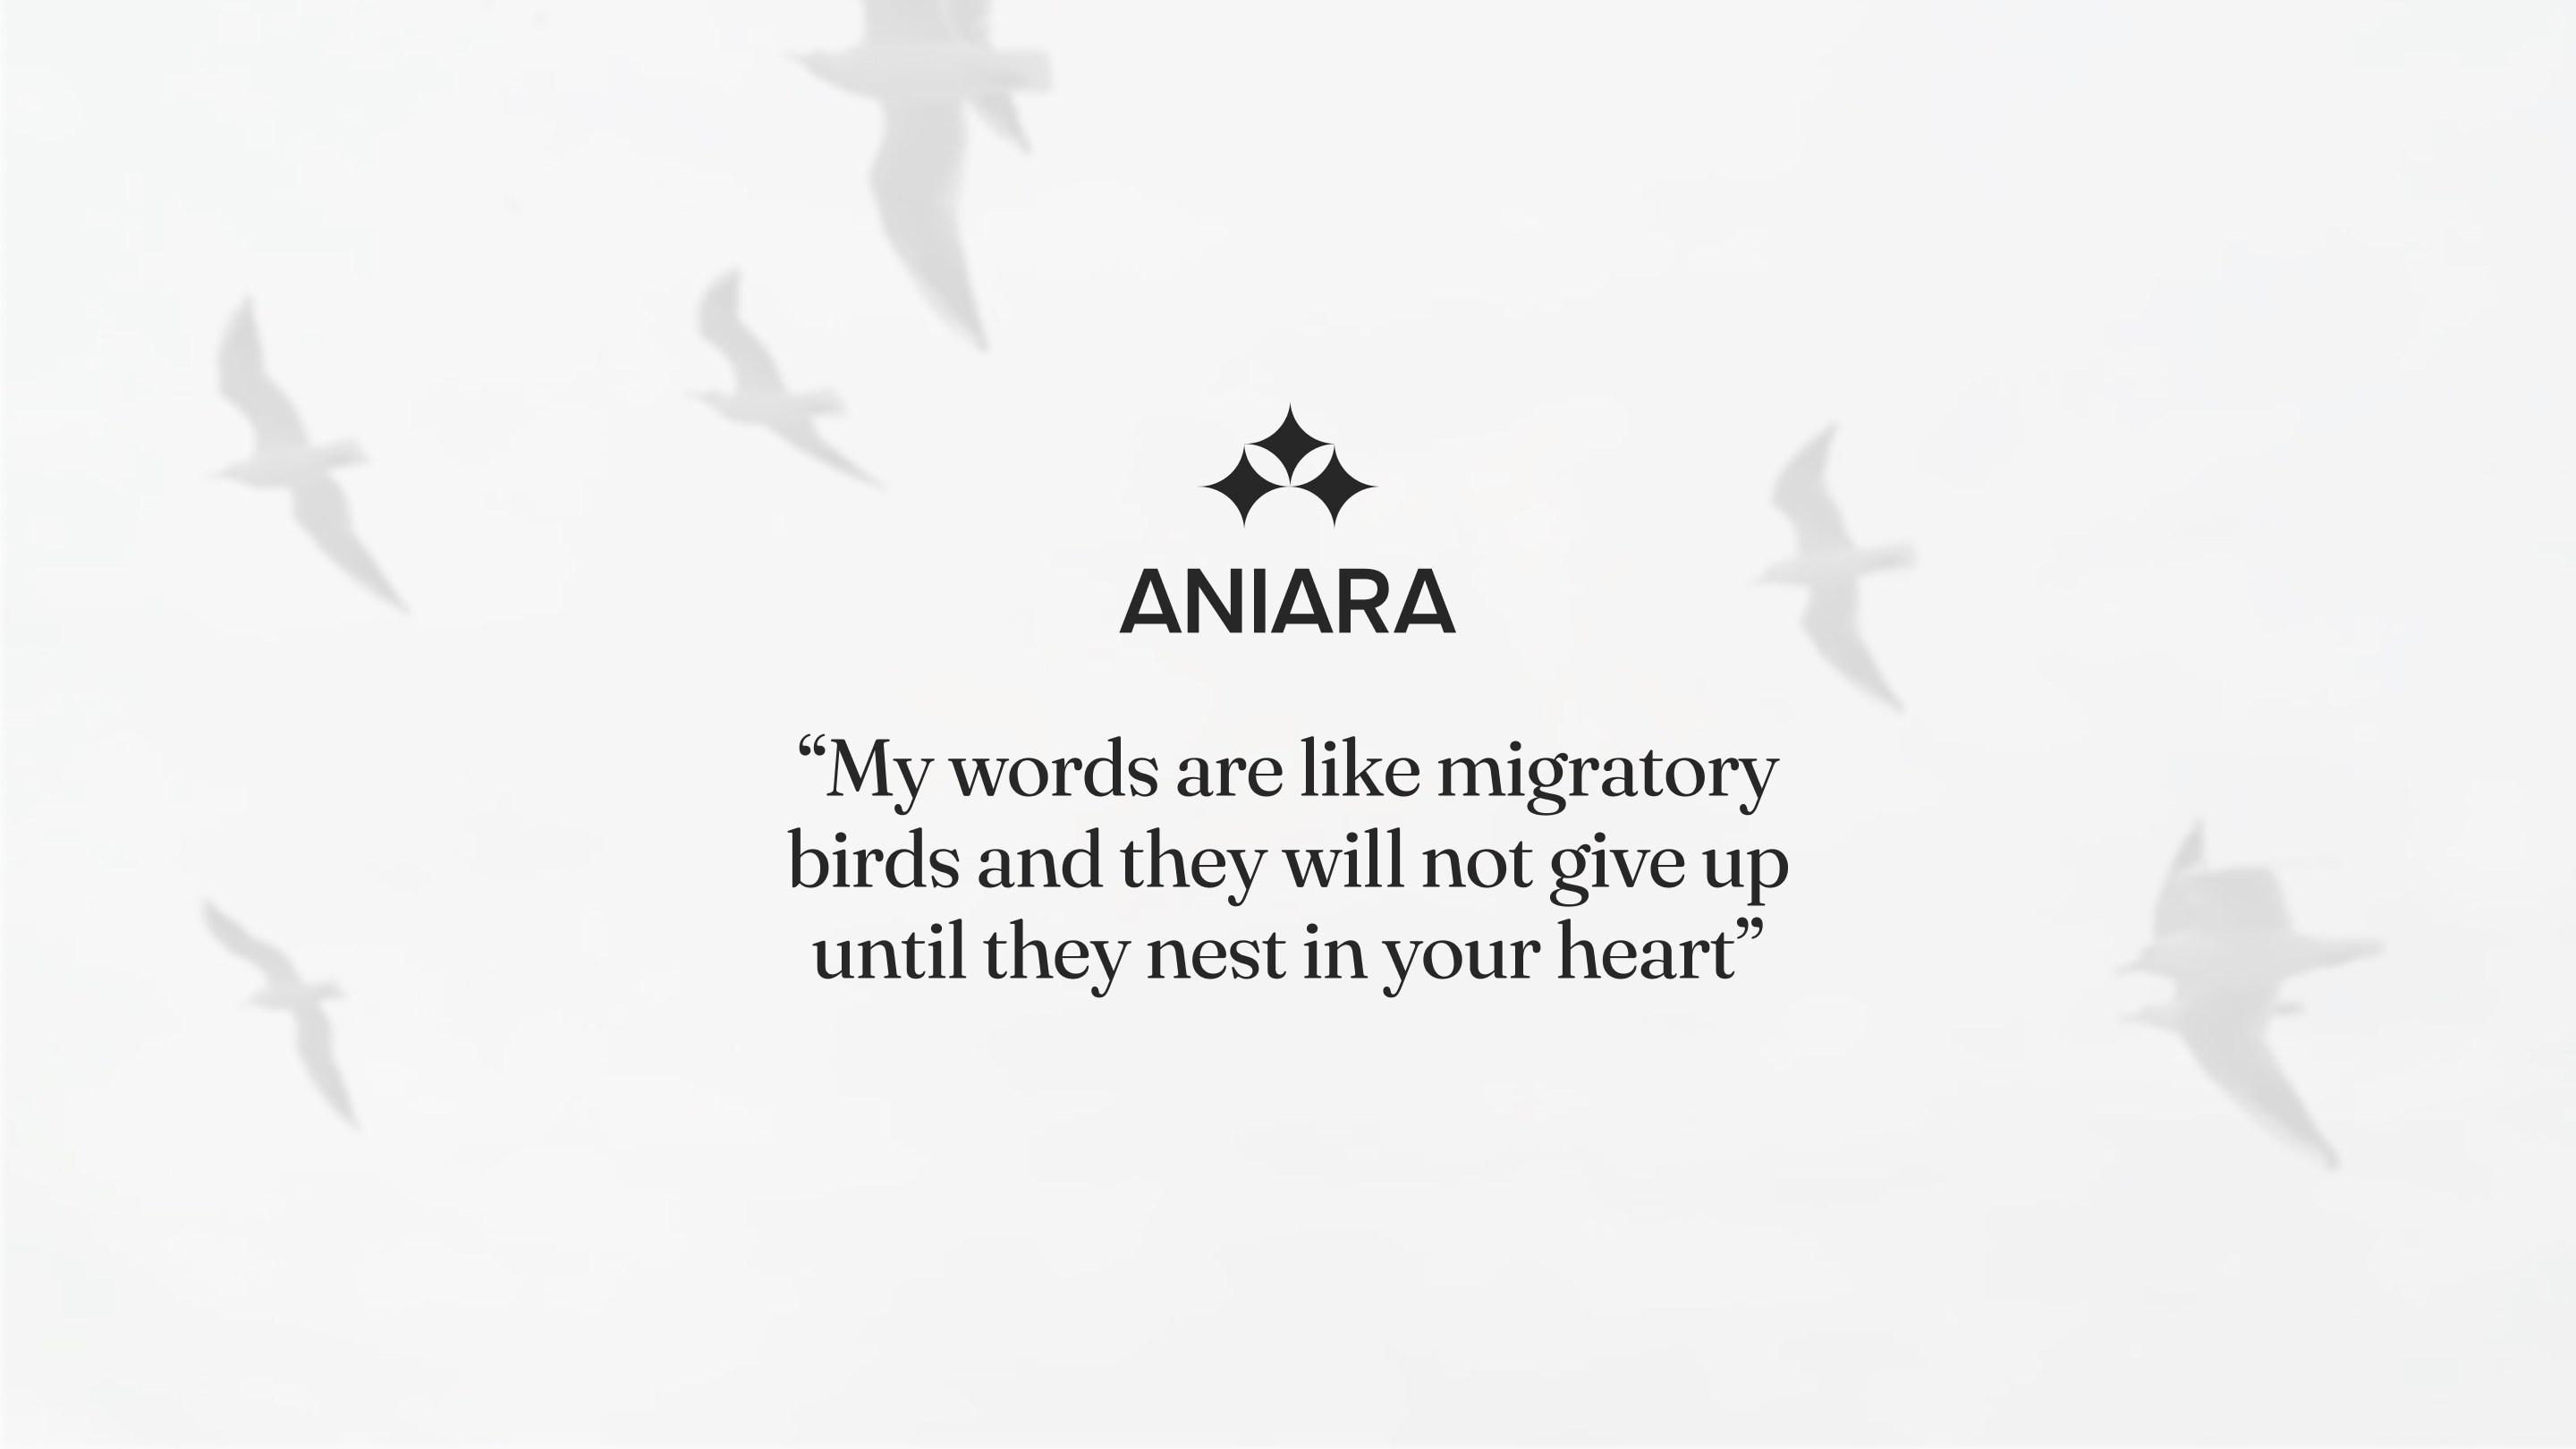 Aniara - My words are like migratory birds and they will not give up until they nest in your heart